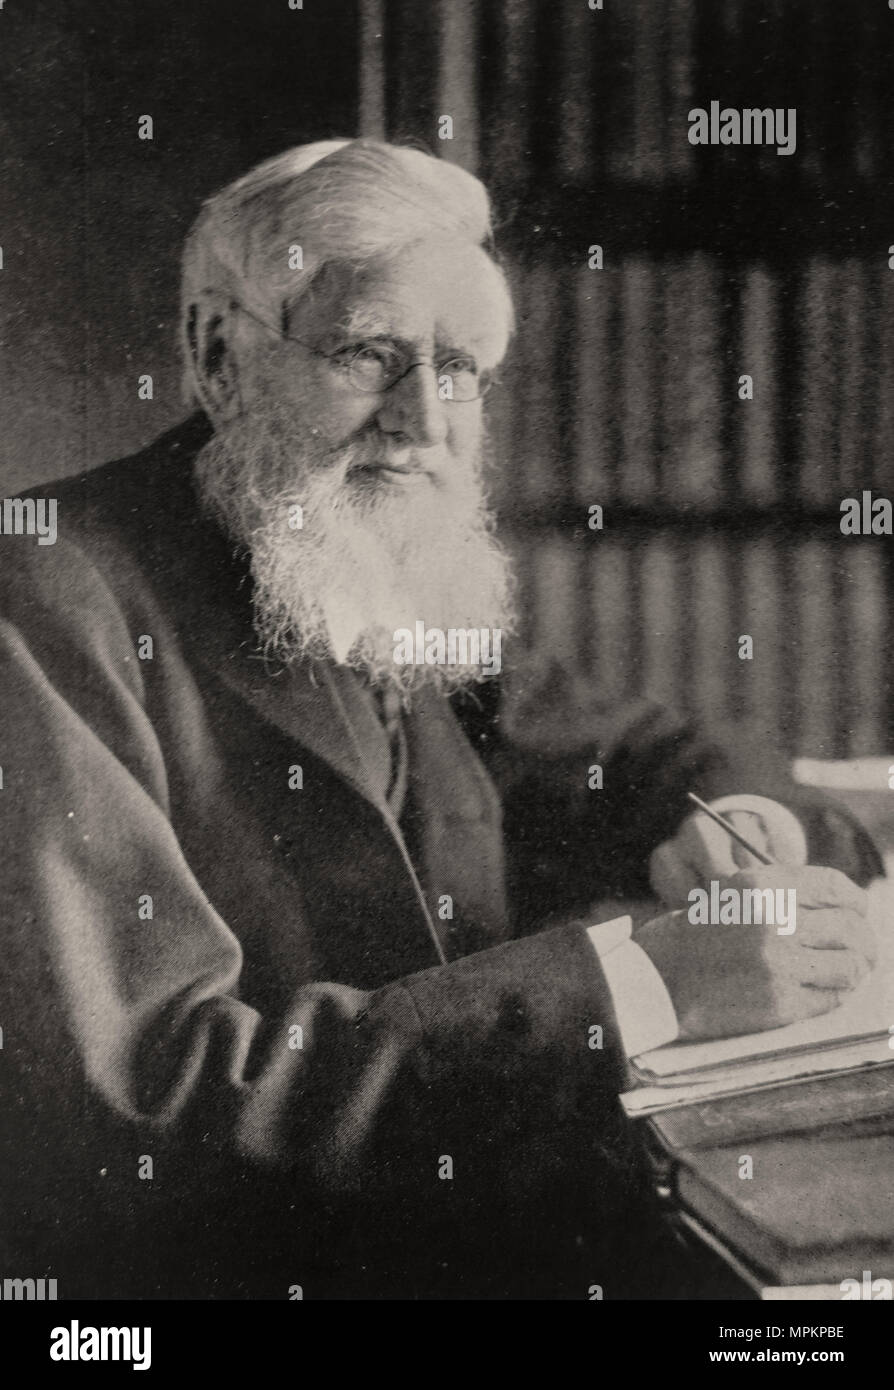 Photo of Alfred Russel Wallace in 'The History of Spiritualism' by Sir Arthur Conan Doyle. NY: George H. Doran, (1926) Stock Photo